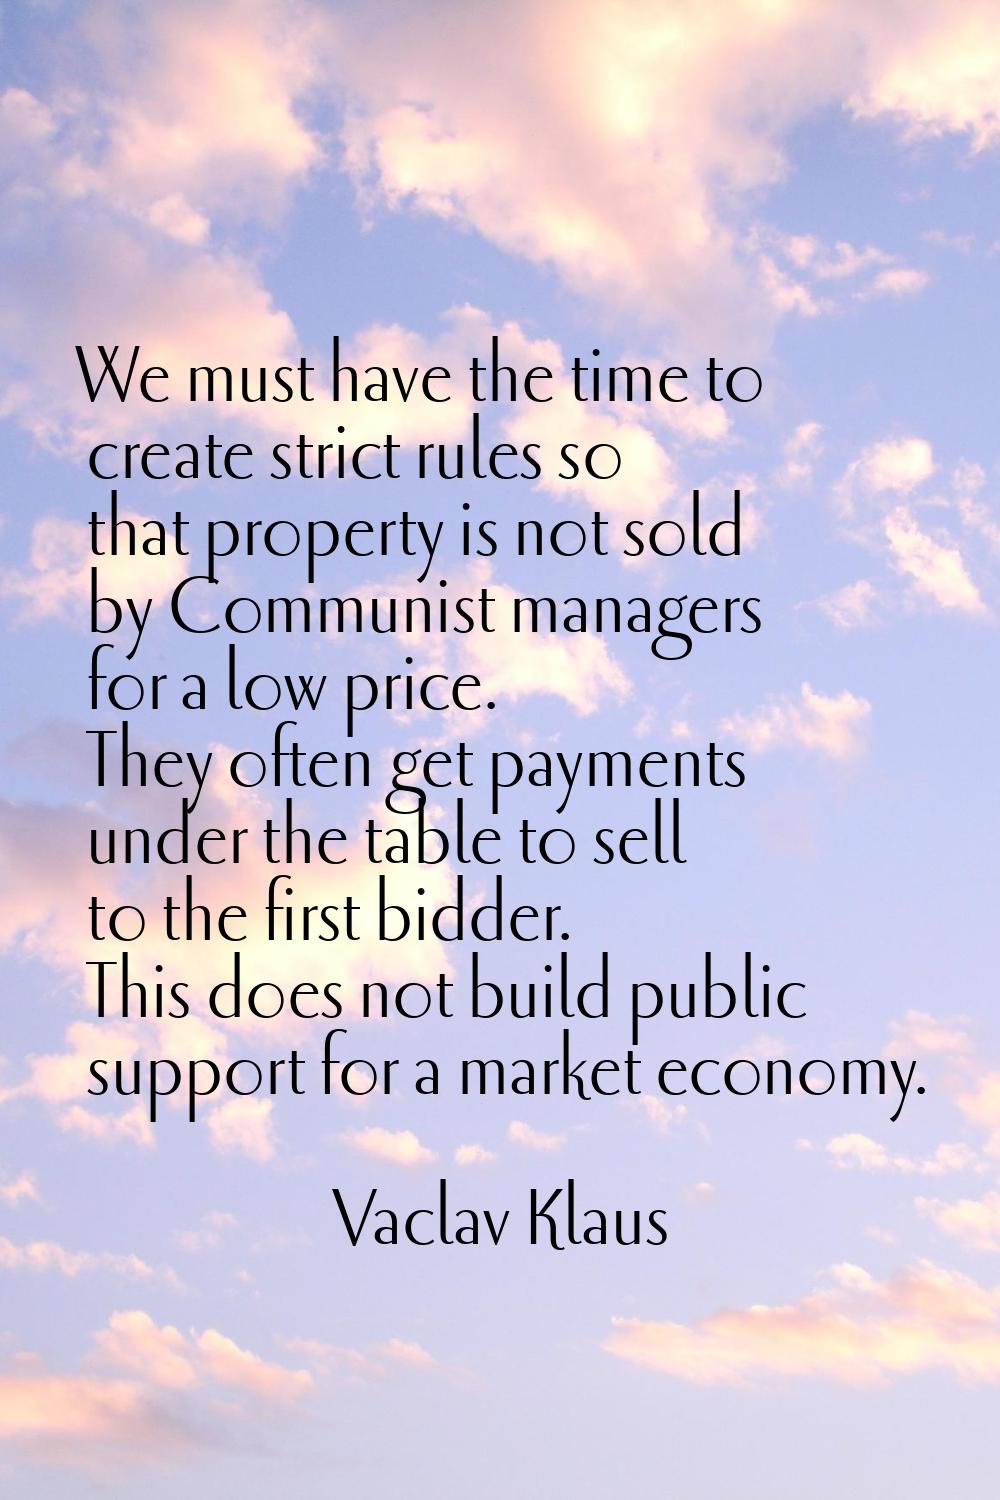 We must have the time to create strict rules so that property is not sold by Communist managers for